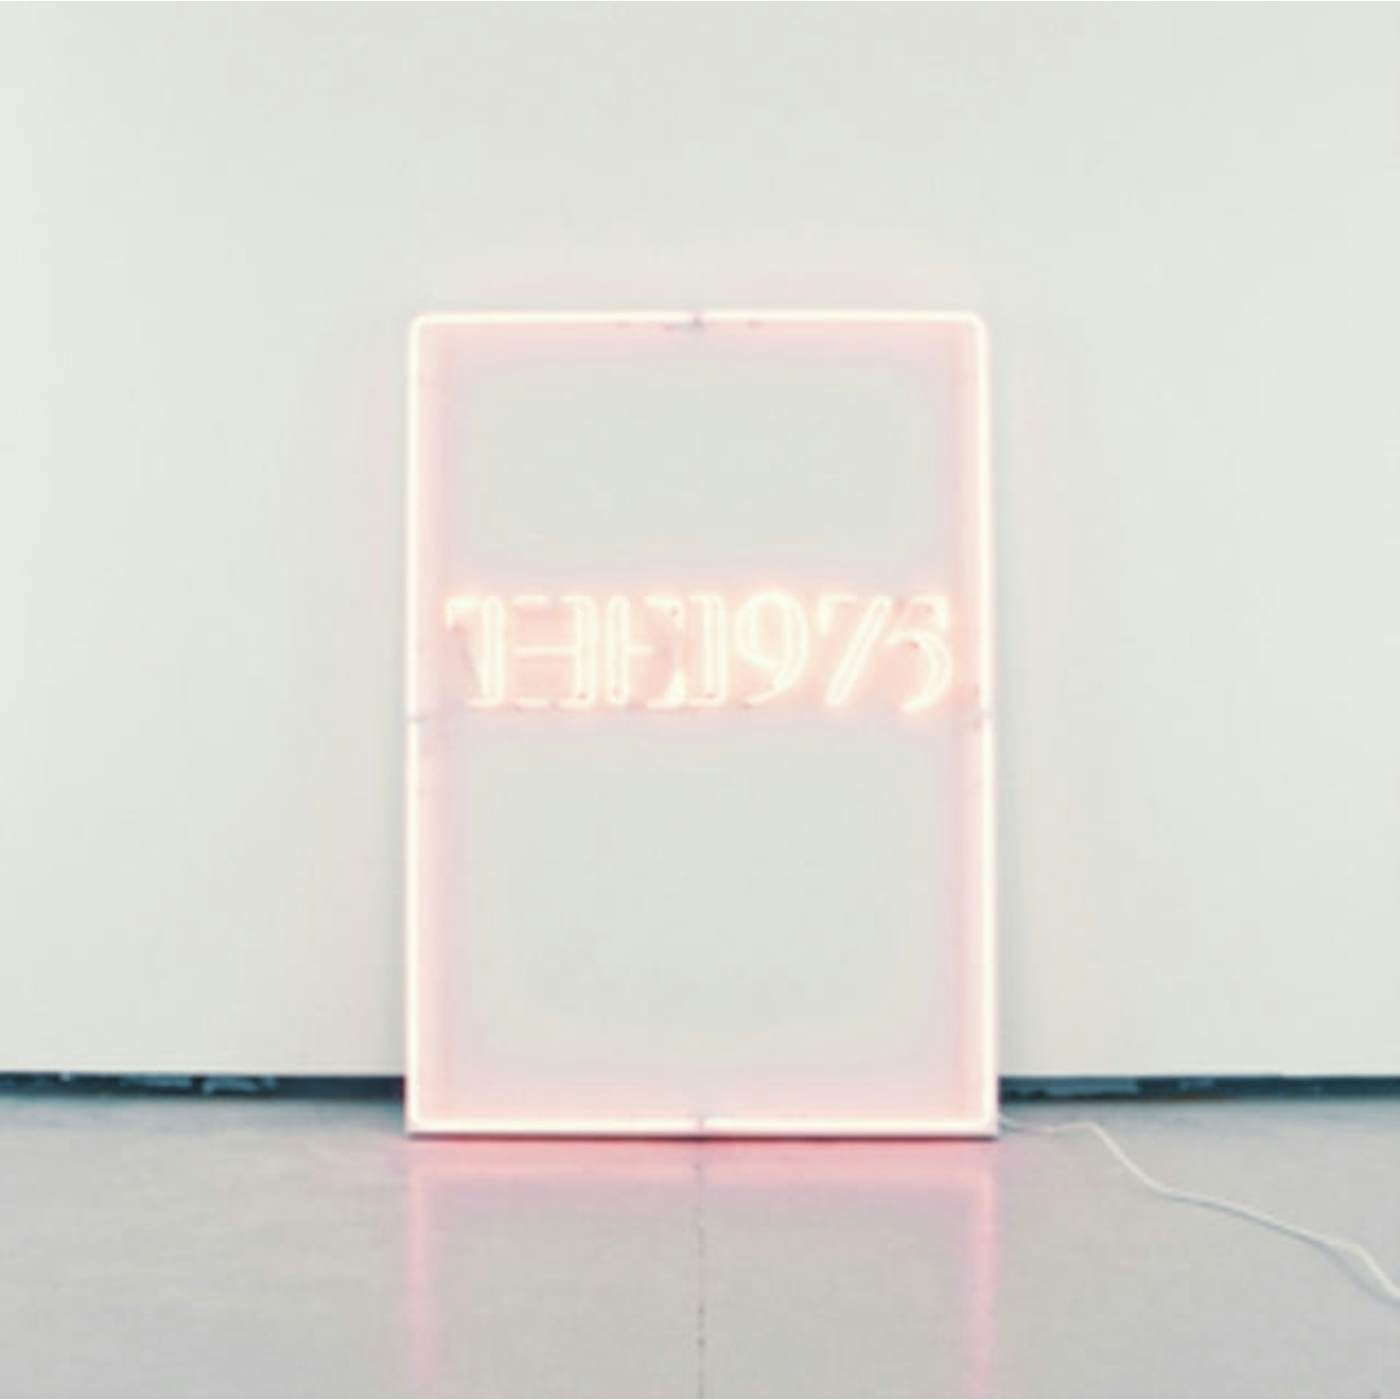 The 1975 19 75 CD - I Like It When You Sleep / For You Are So Beautiful Yet So Unaware Of It